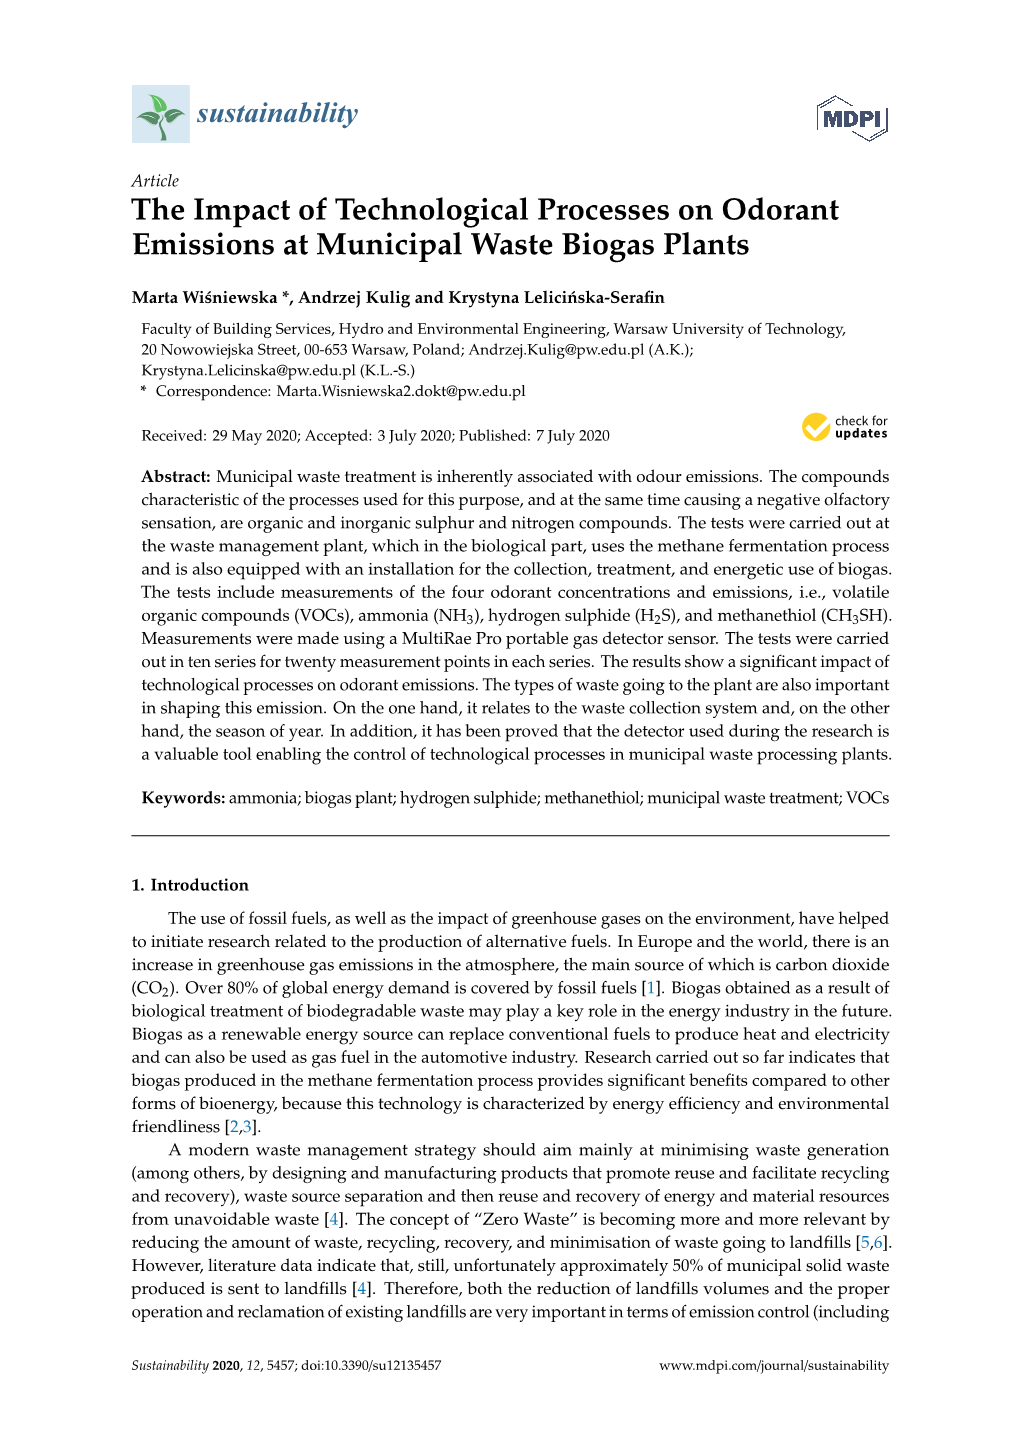 The Impact of Technological Processes on Odorant Emissions at Municipal Waste Biogas Plants